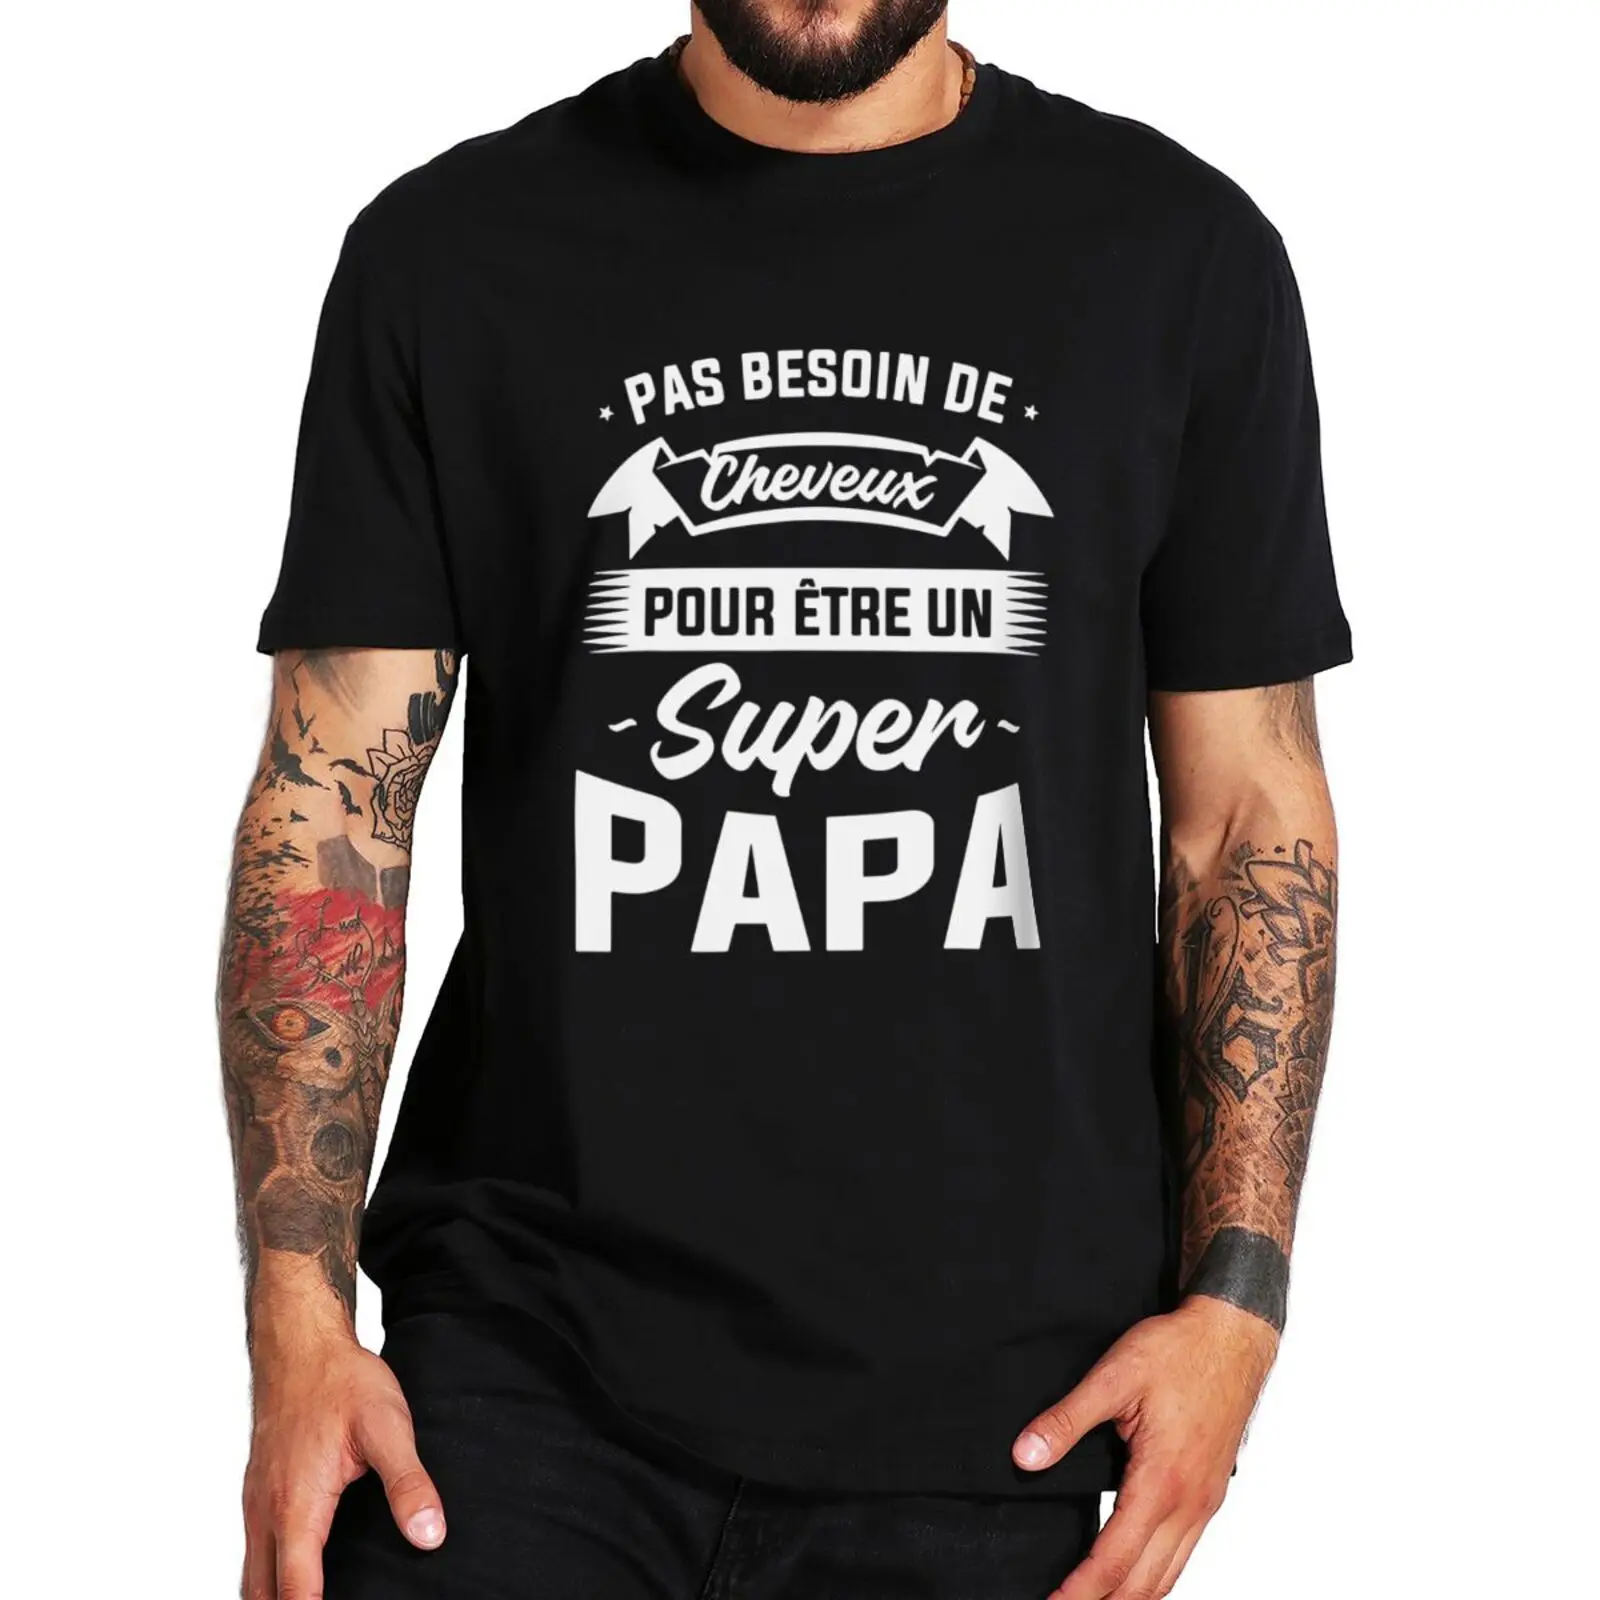 

You Don't Need Hair To Be A Dad T Shirt Funny French Jokes Papa Gift Short Sleeve Summer 100% Cotton Casual T-shirts EU Size